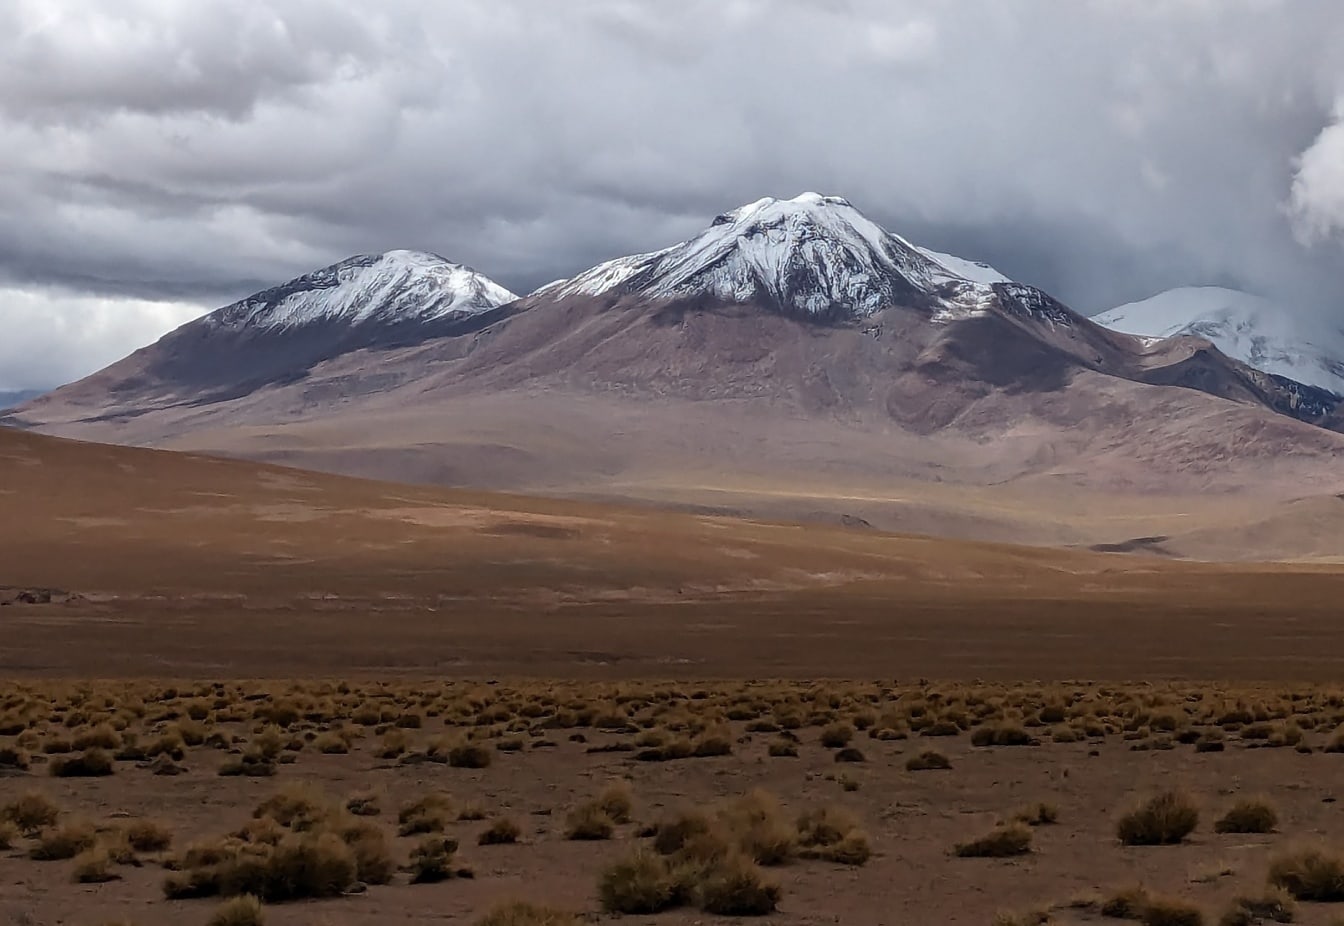 Landscape with mountain with snowy peaks and clouds in Atacama desert in South America